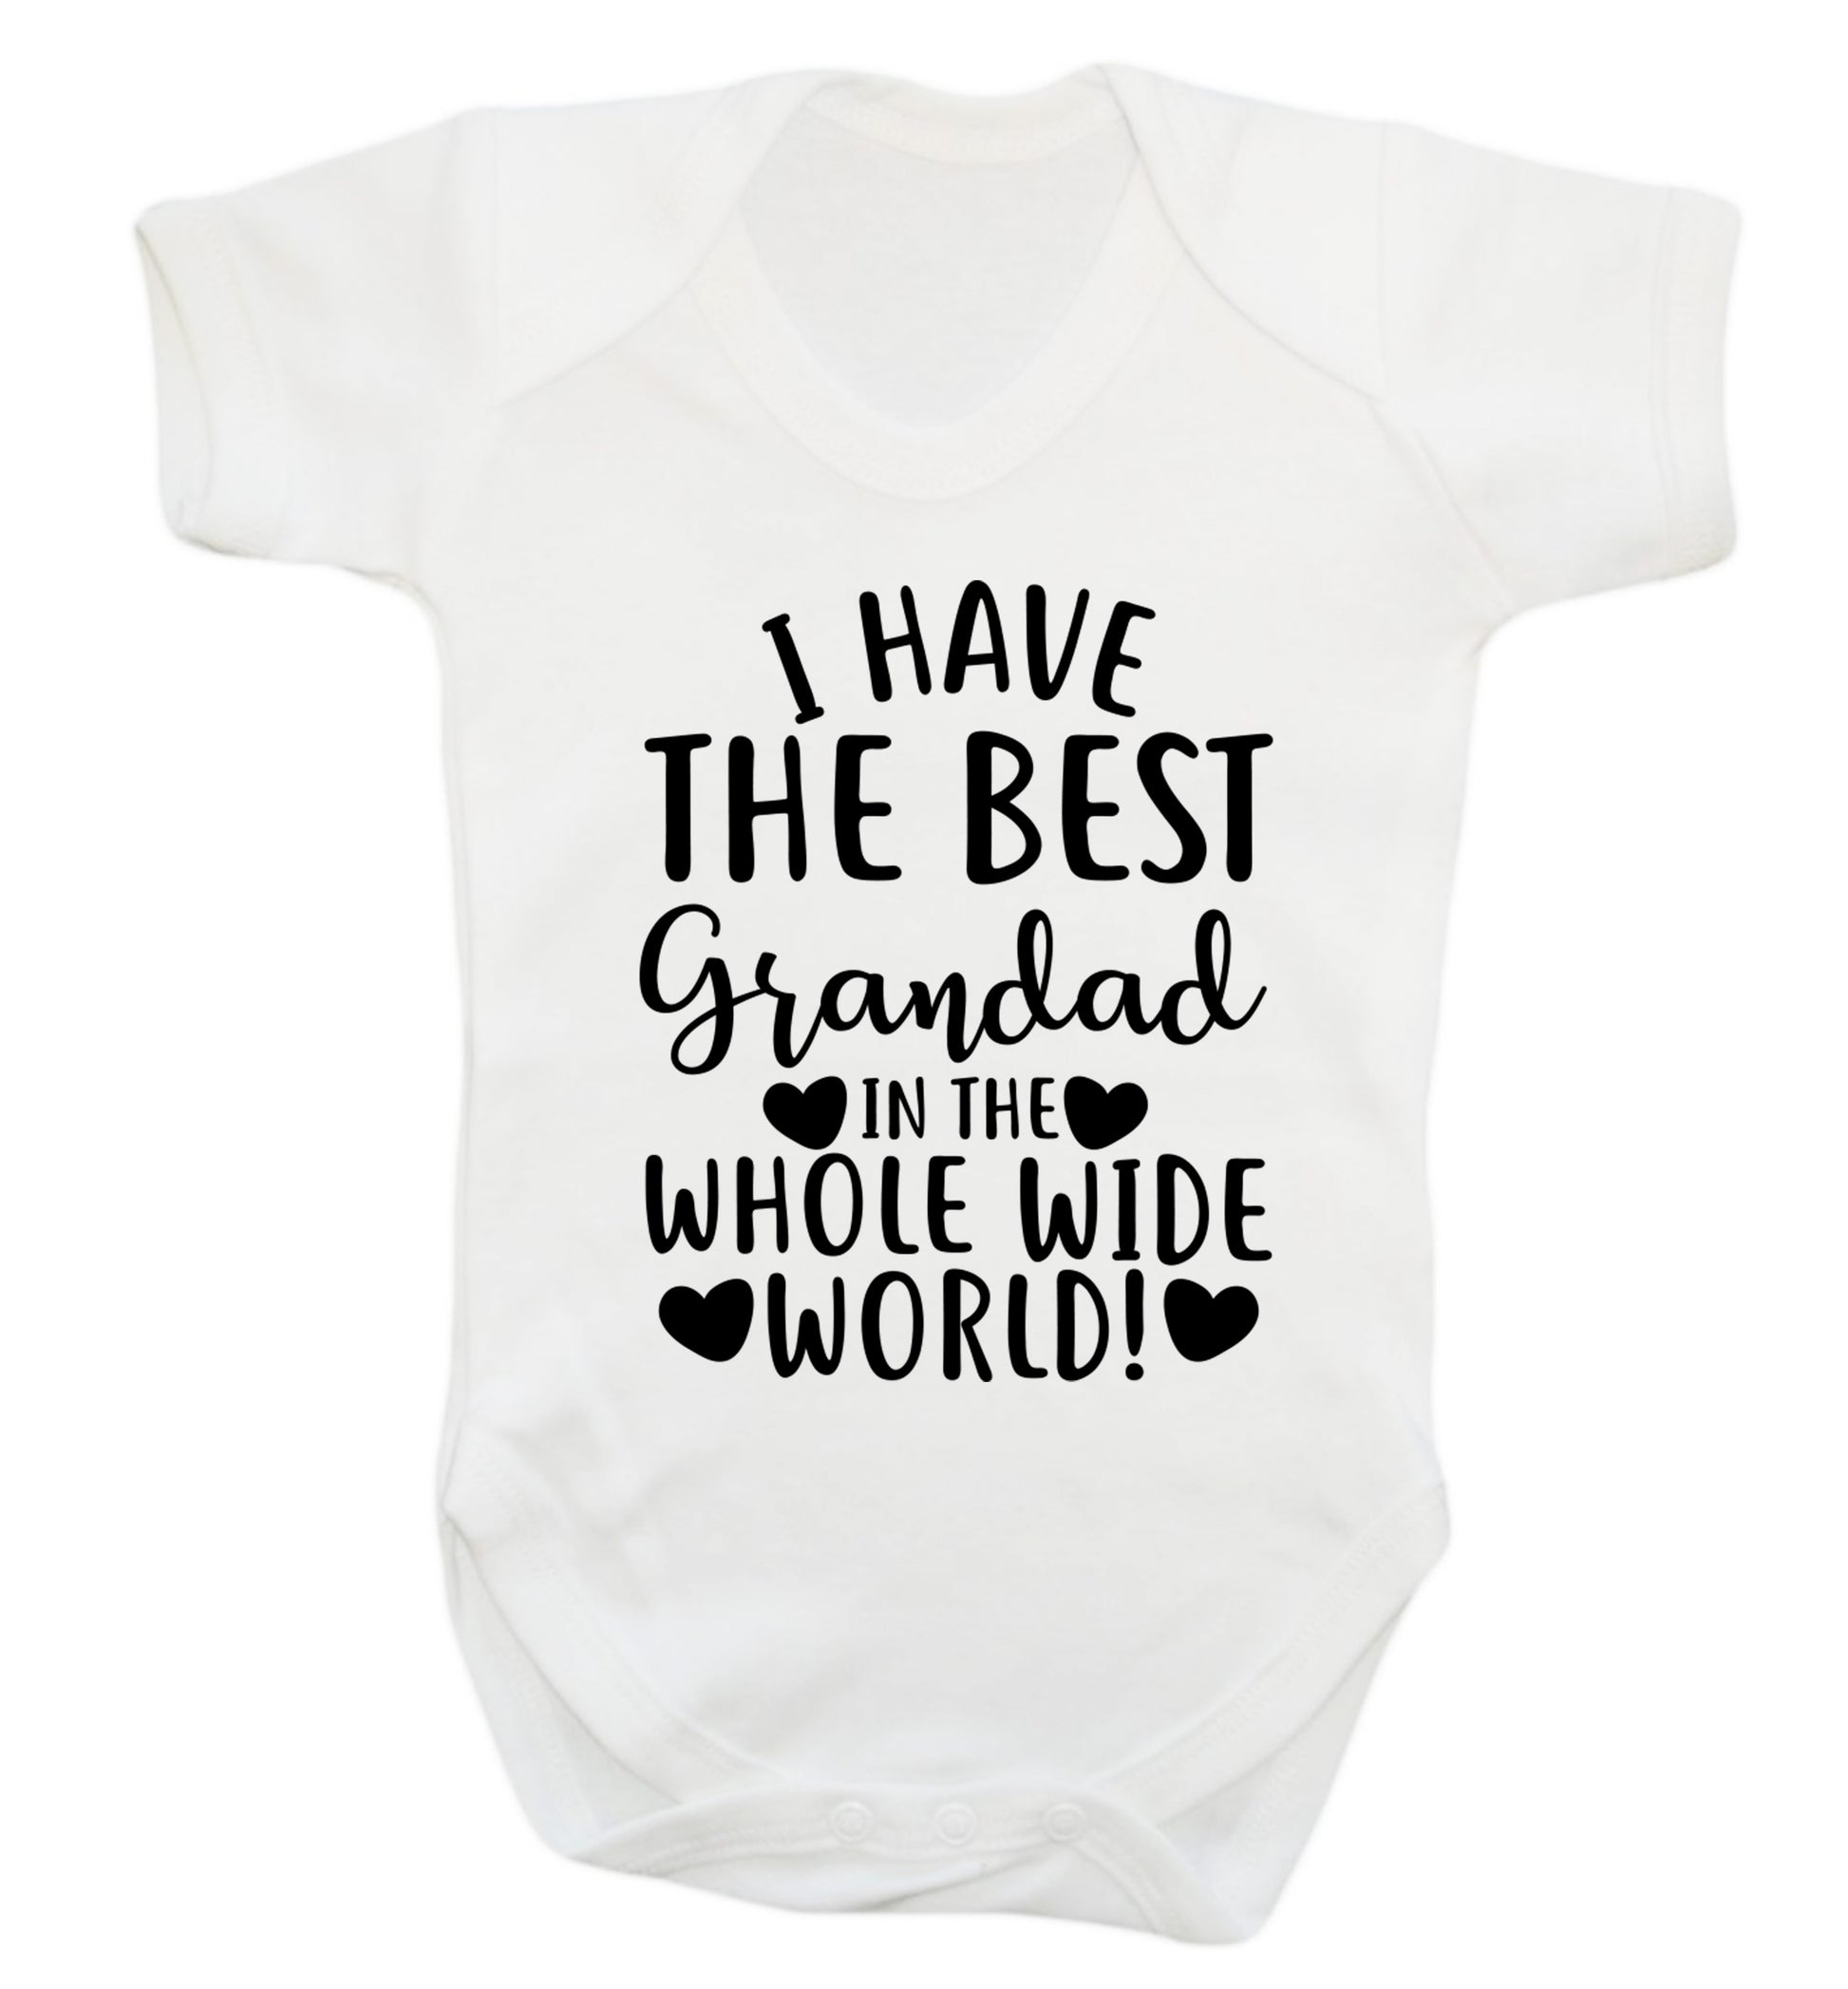 I have the best grandad in the whole wide world! Baby Vest white 18-24 months